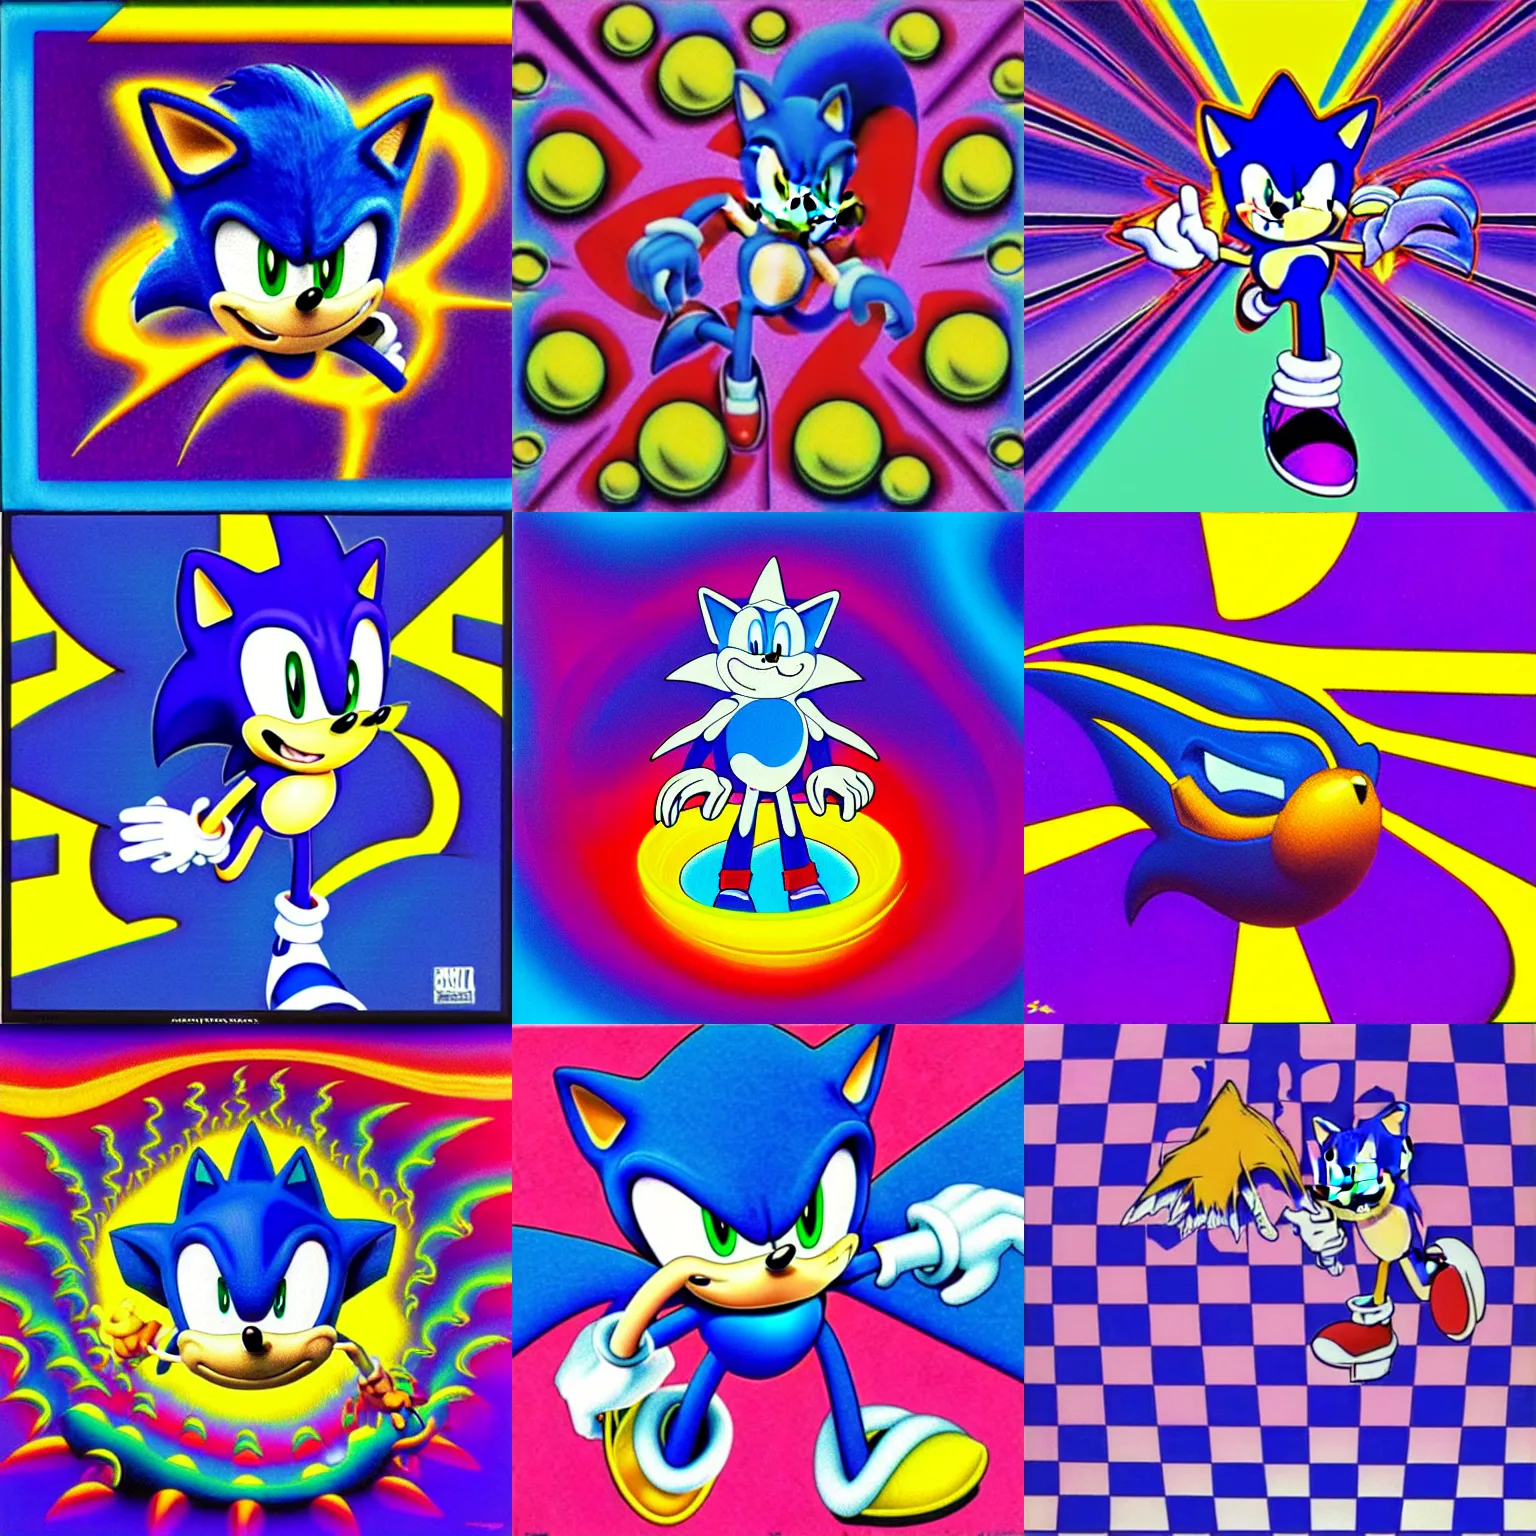 Prompt: surreal, sharp, lowbrow, detailed professional, high quality airbrush art MGMT sonic the hedgehog album cover of a liquid dissolving LSD DMT blue sonic the hedgehog falling through a mirror ocean, purple checkerboard background, 1990s 1992 acid house techno Sega Genesis video game album cover